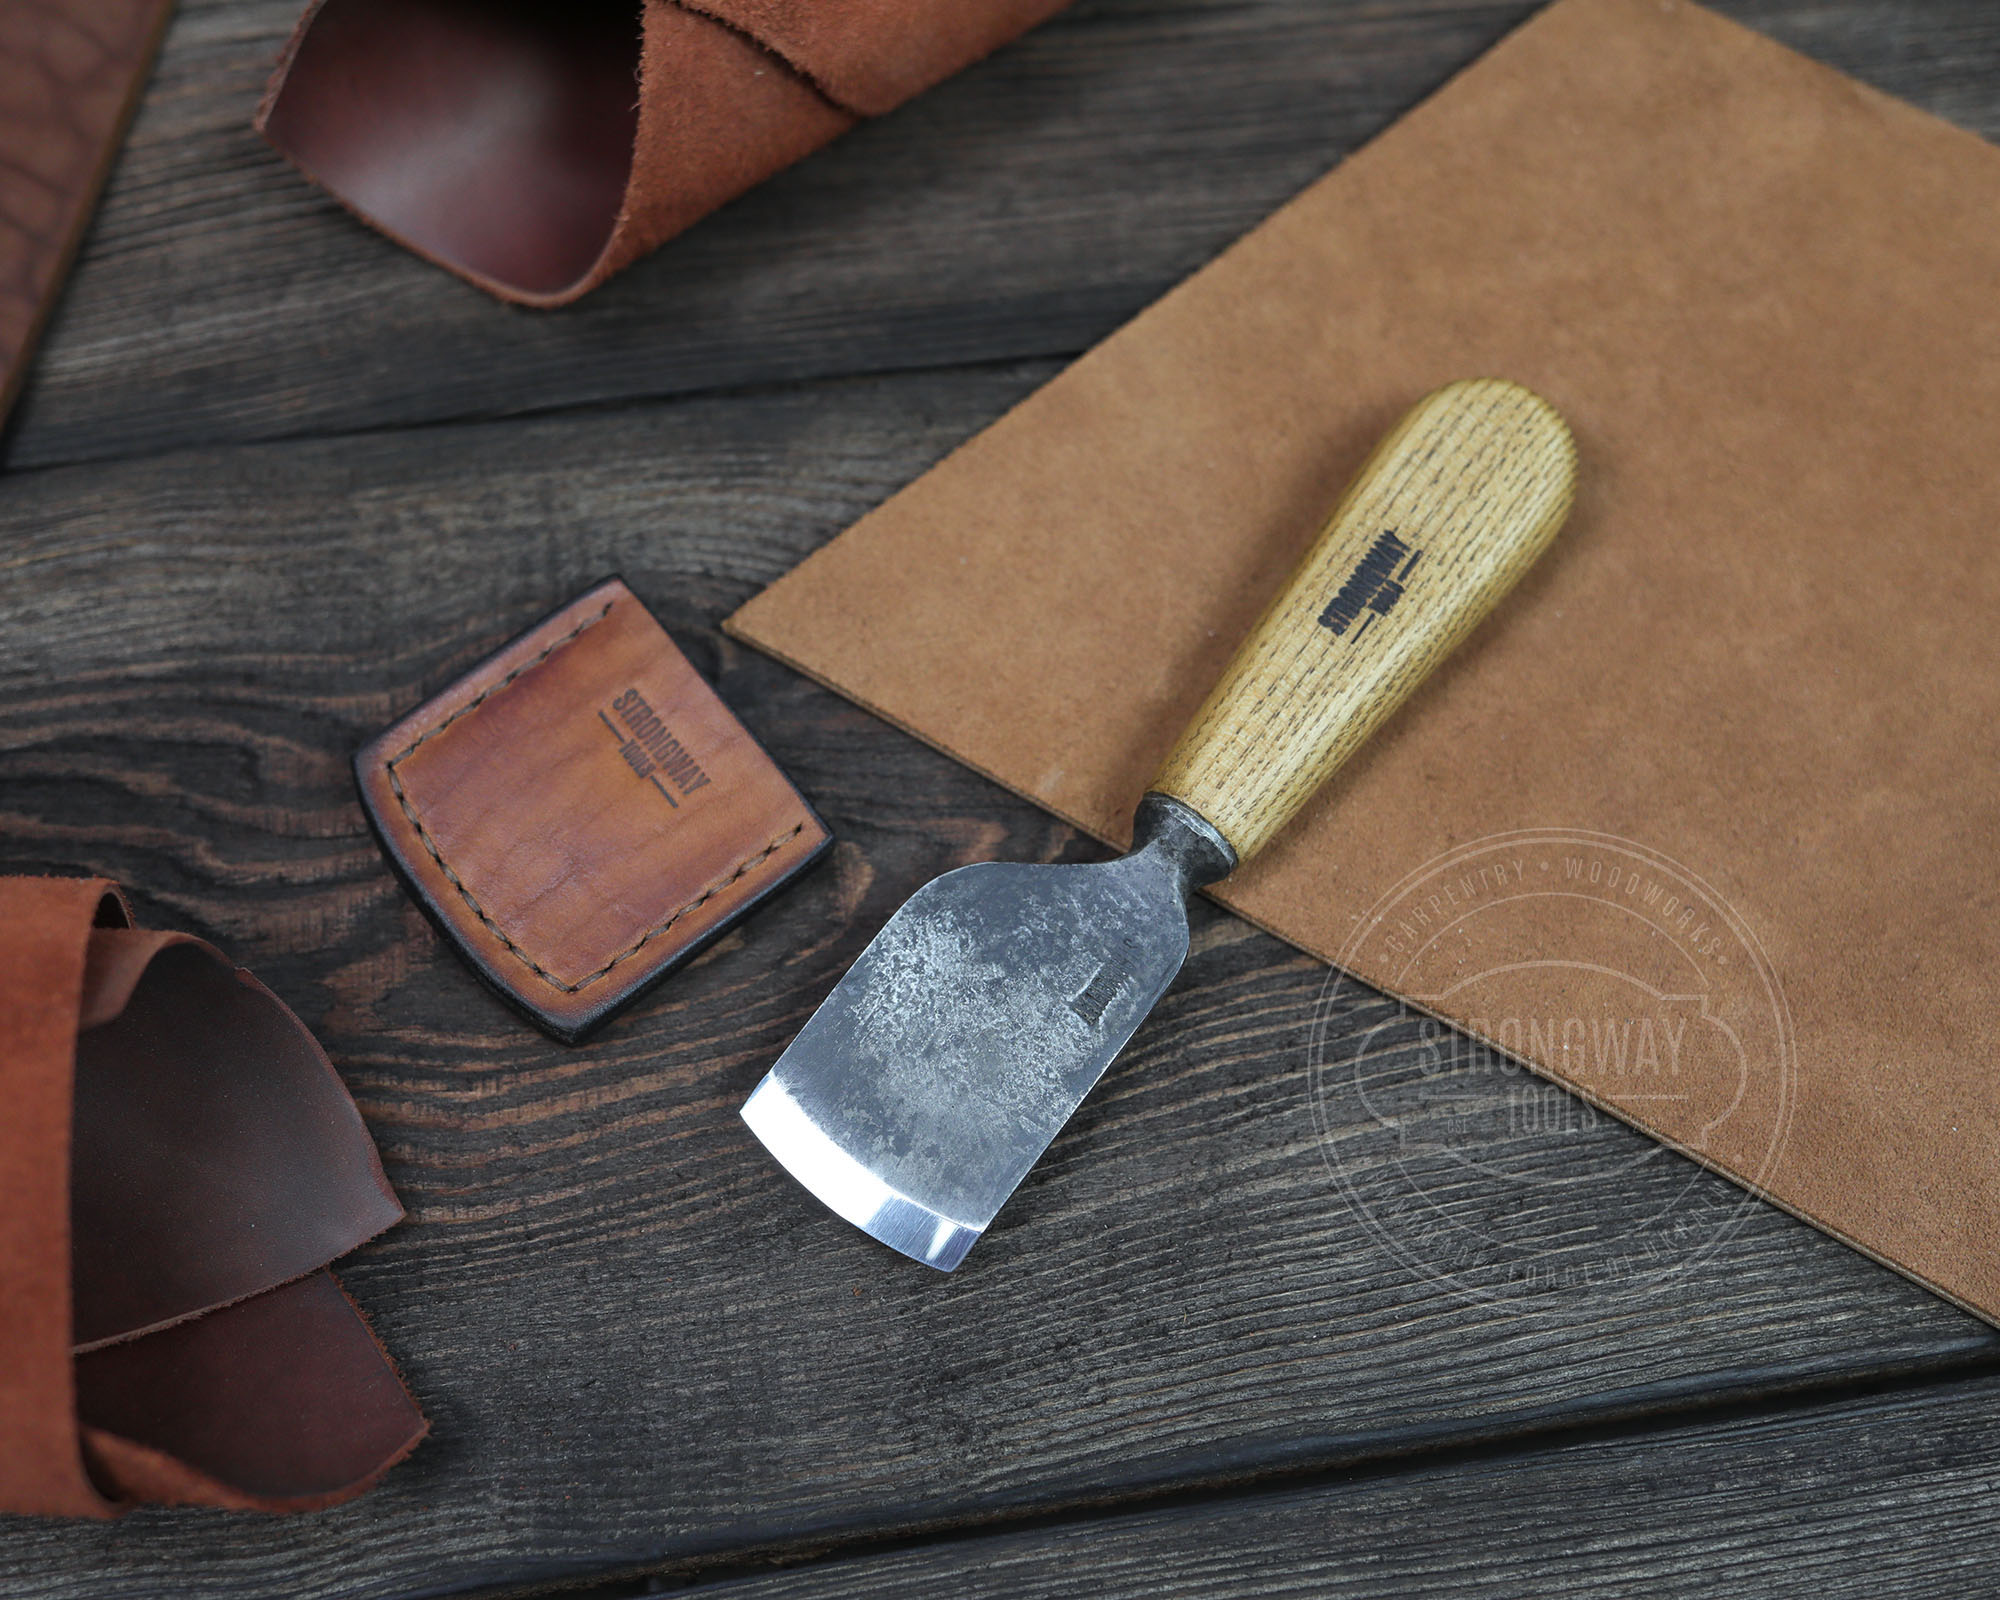 Rounded Leather Skiving Knife